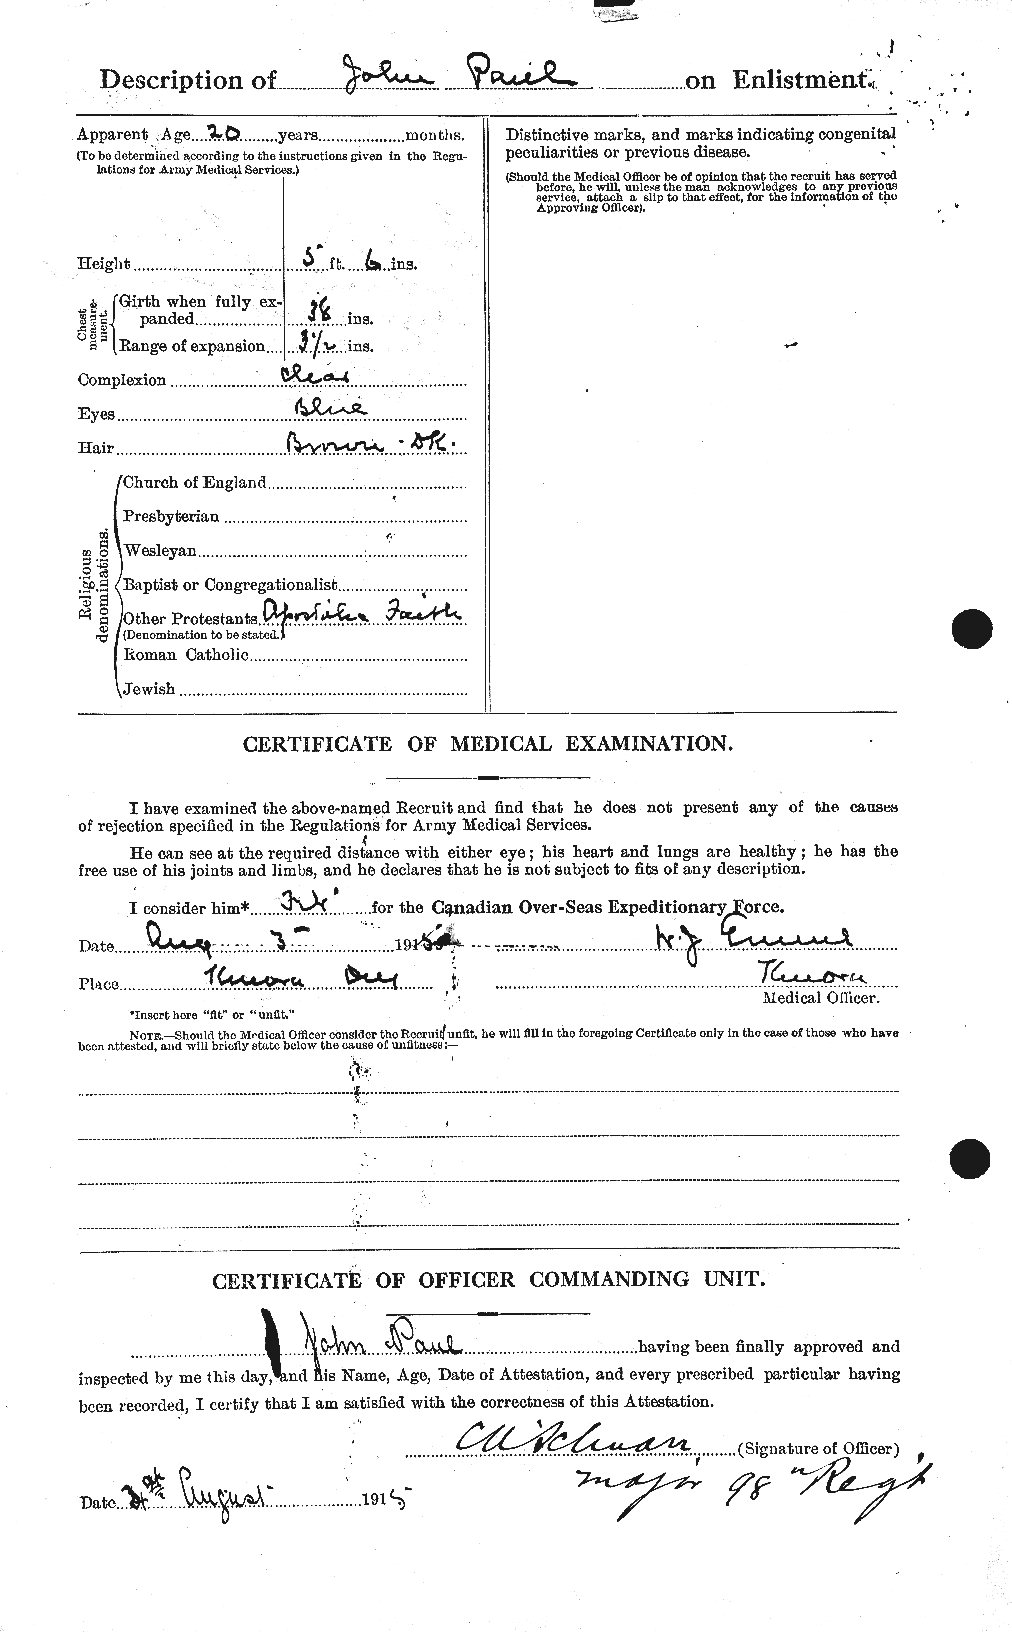 Personnel Records of the First World War - CEF 569248b